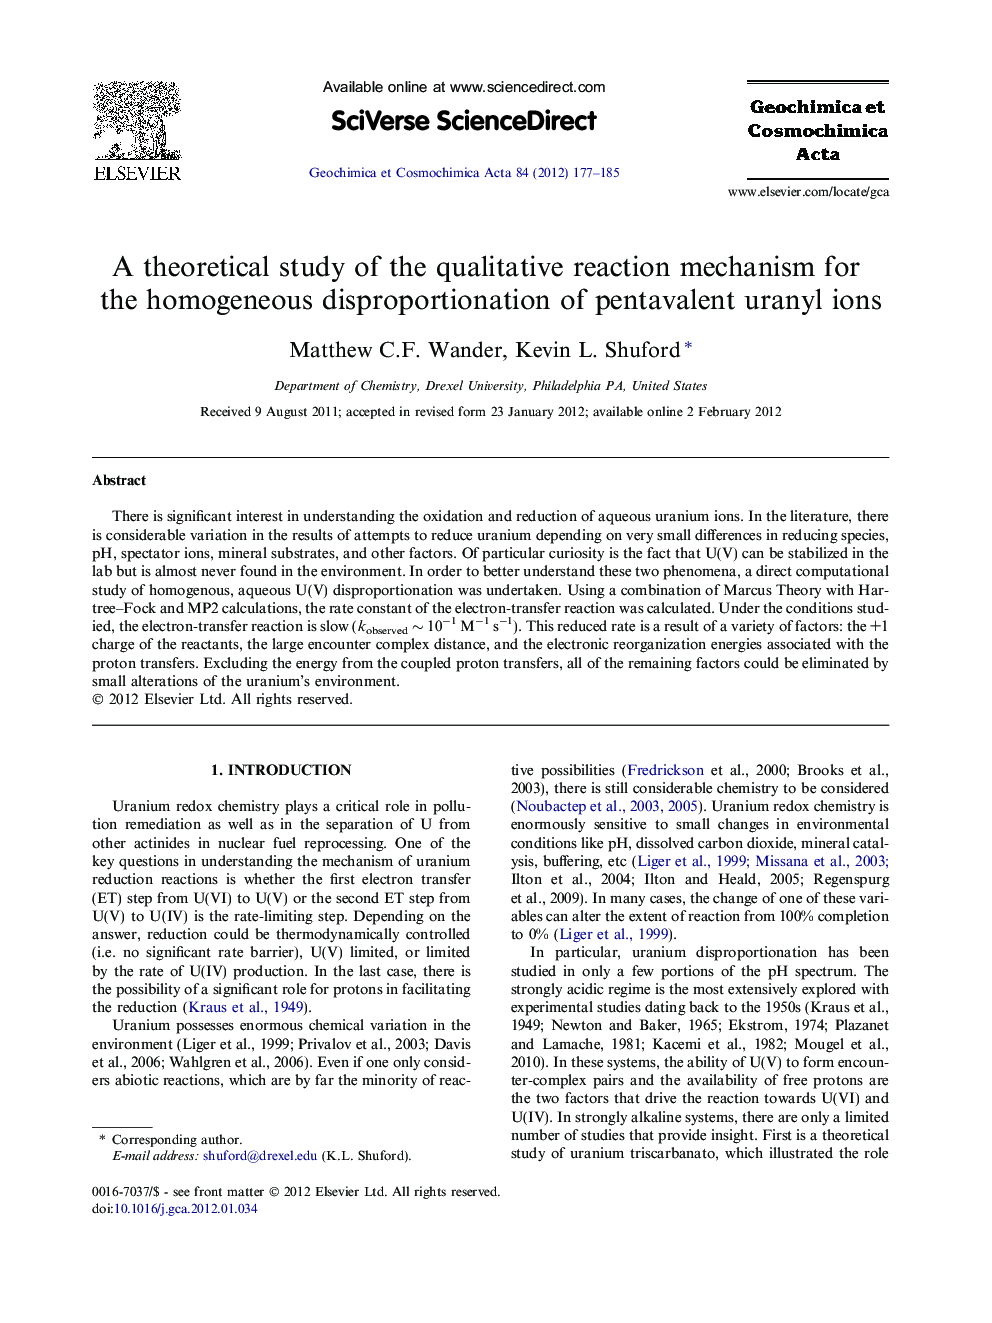 A theoretical study of the qualitative reaction mechanism for the homogeneous disproportionation of pentavalent uranyl ions